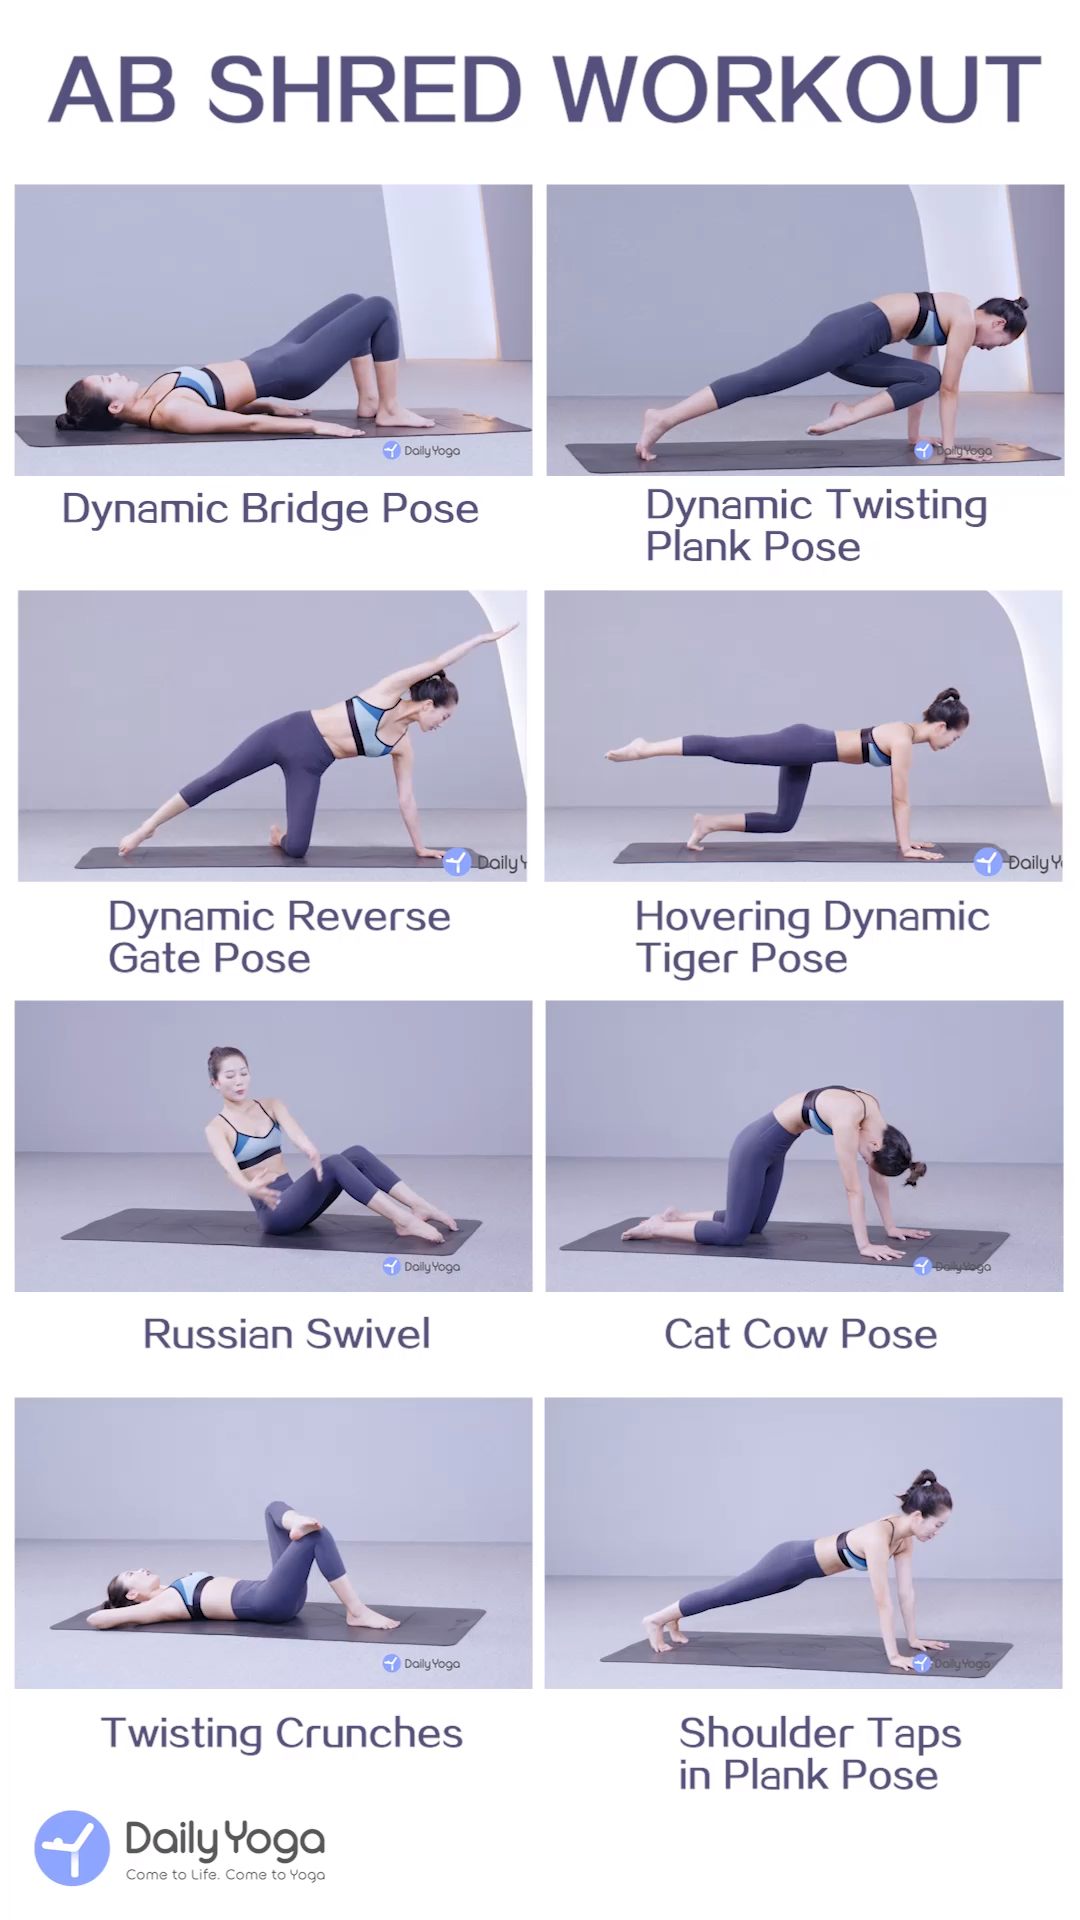 AB SHRED WORKOUT - AB SHRED WORKOUT -   17 fitness Training runners ideas